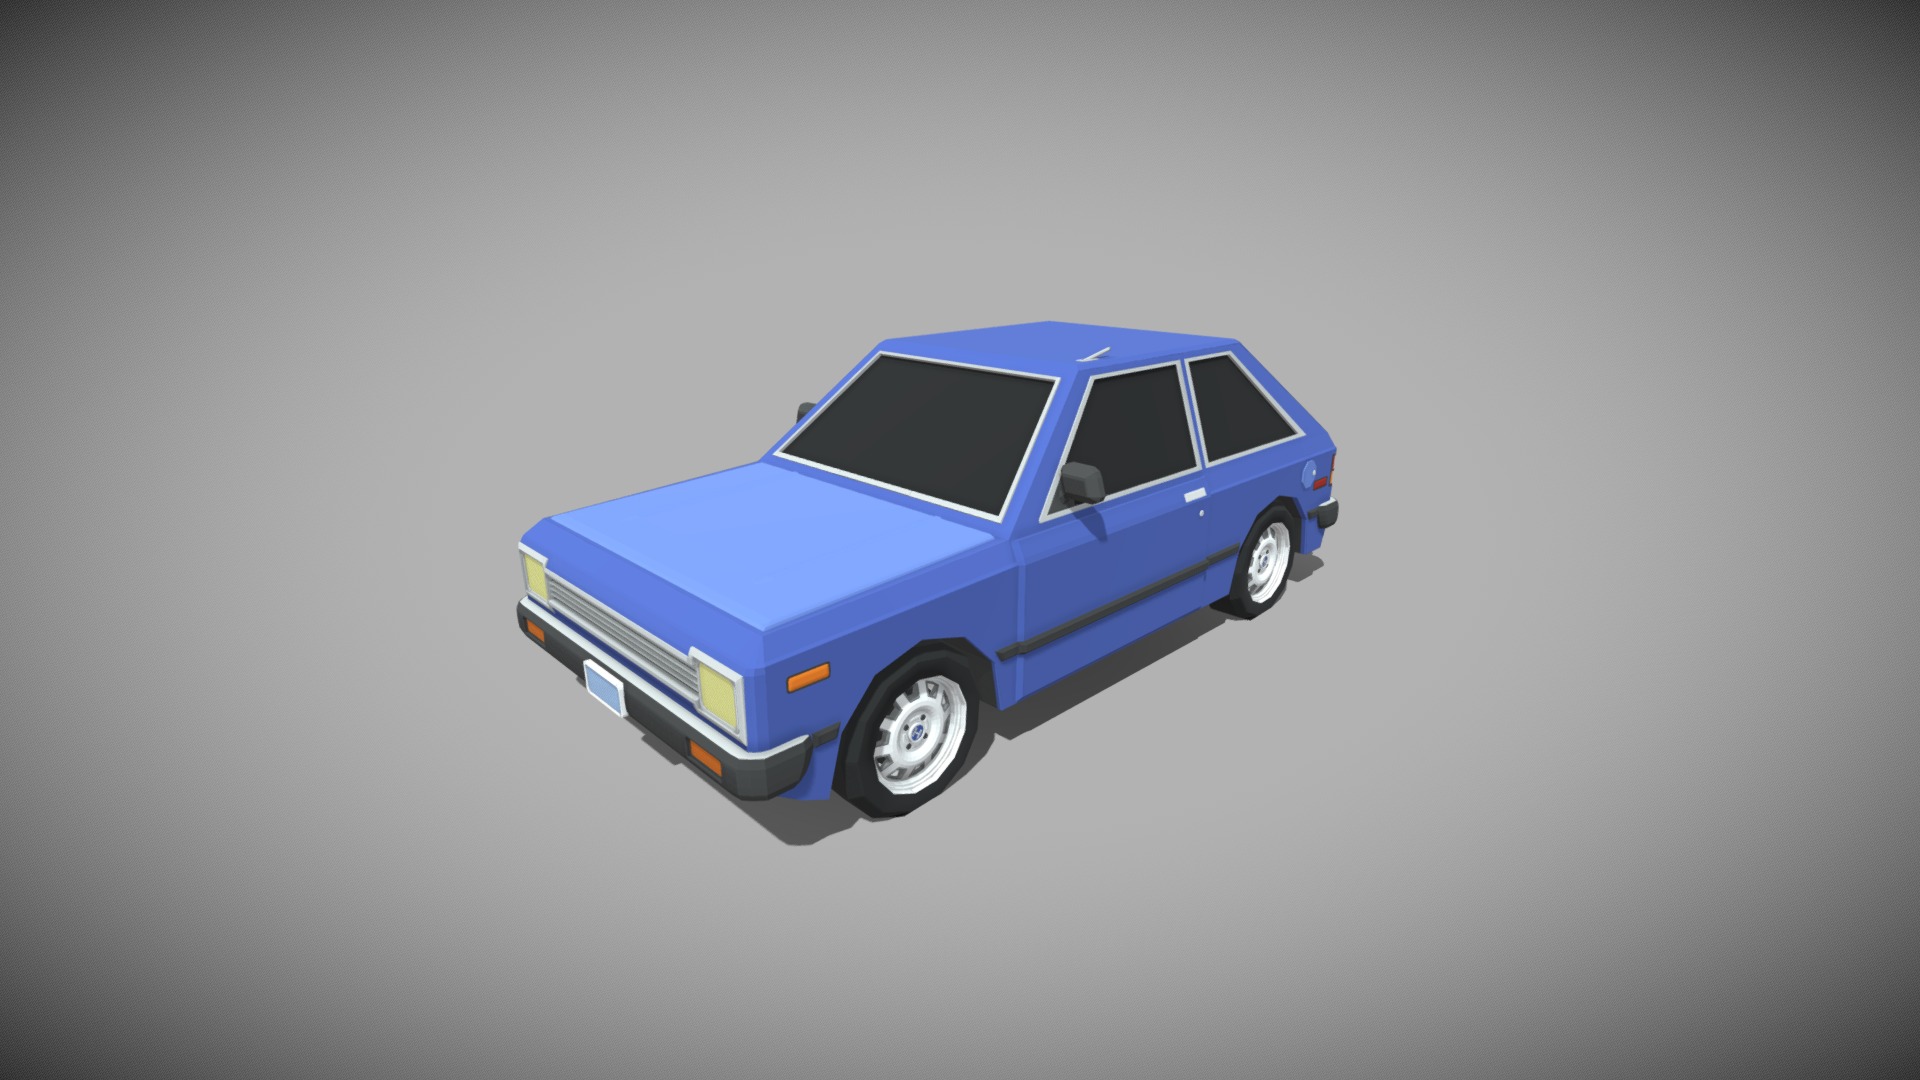 3D model Blue Compact Car Preview - This is a 3D model of the Blue Compact Car Preview. The 3D model is about a small blue car.